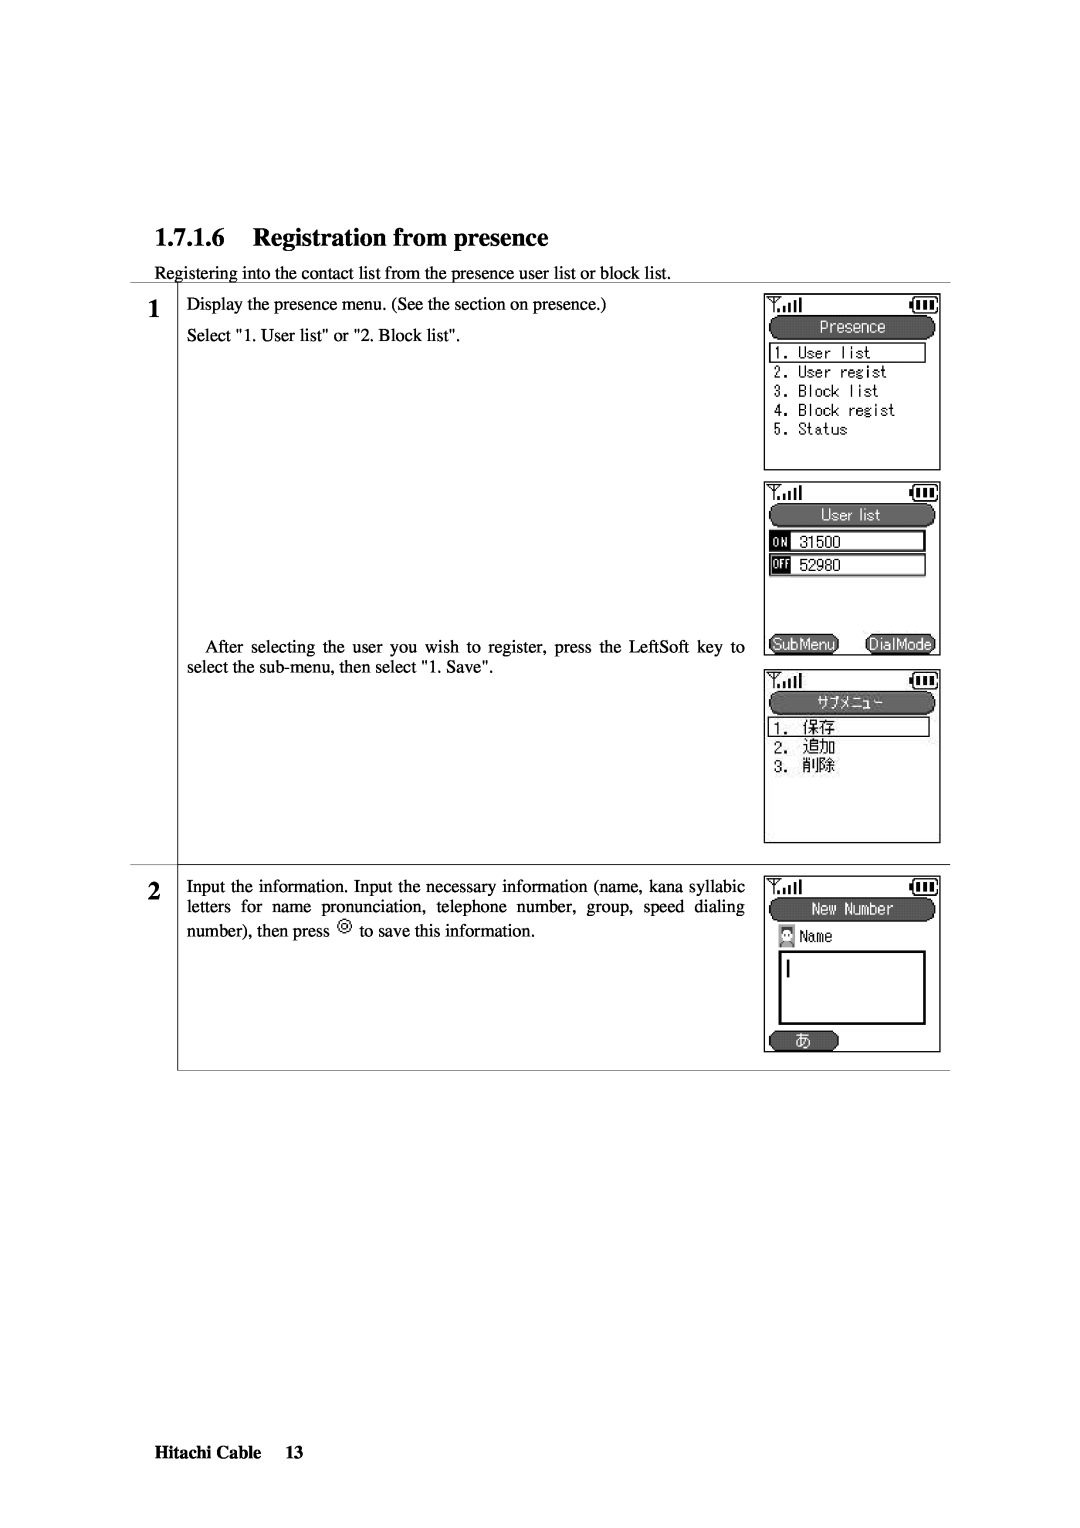 Hitachi TD61-2472 user manual Registration from presence, Hitachi Cable 